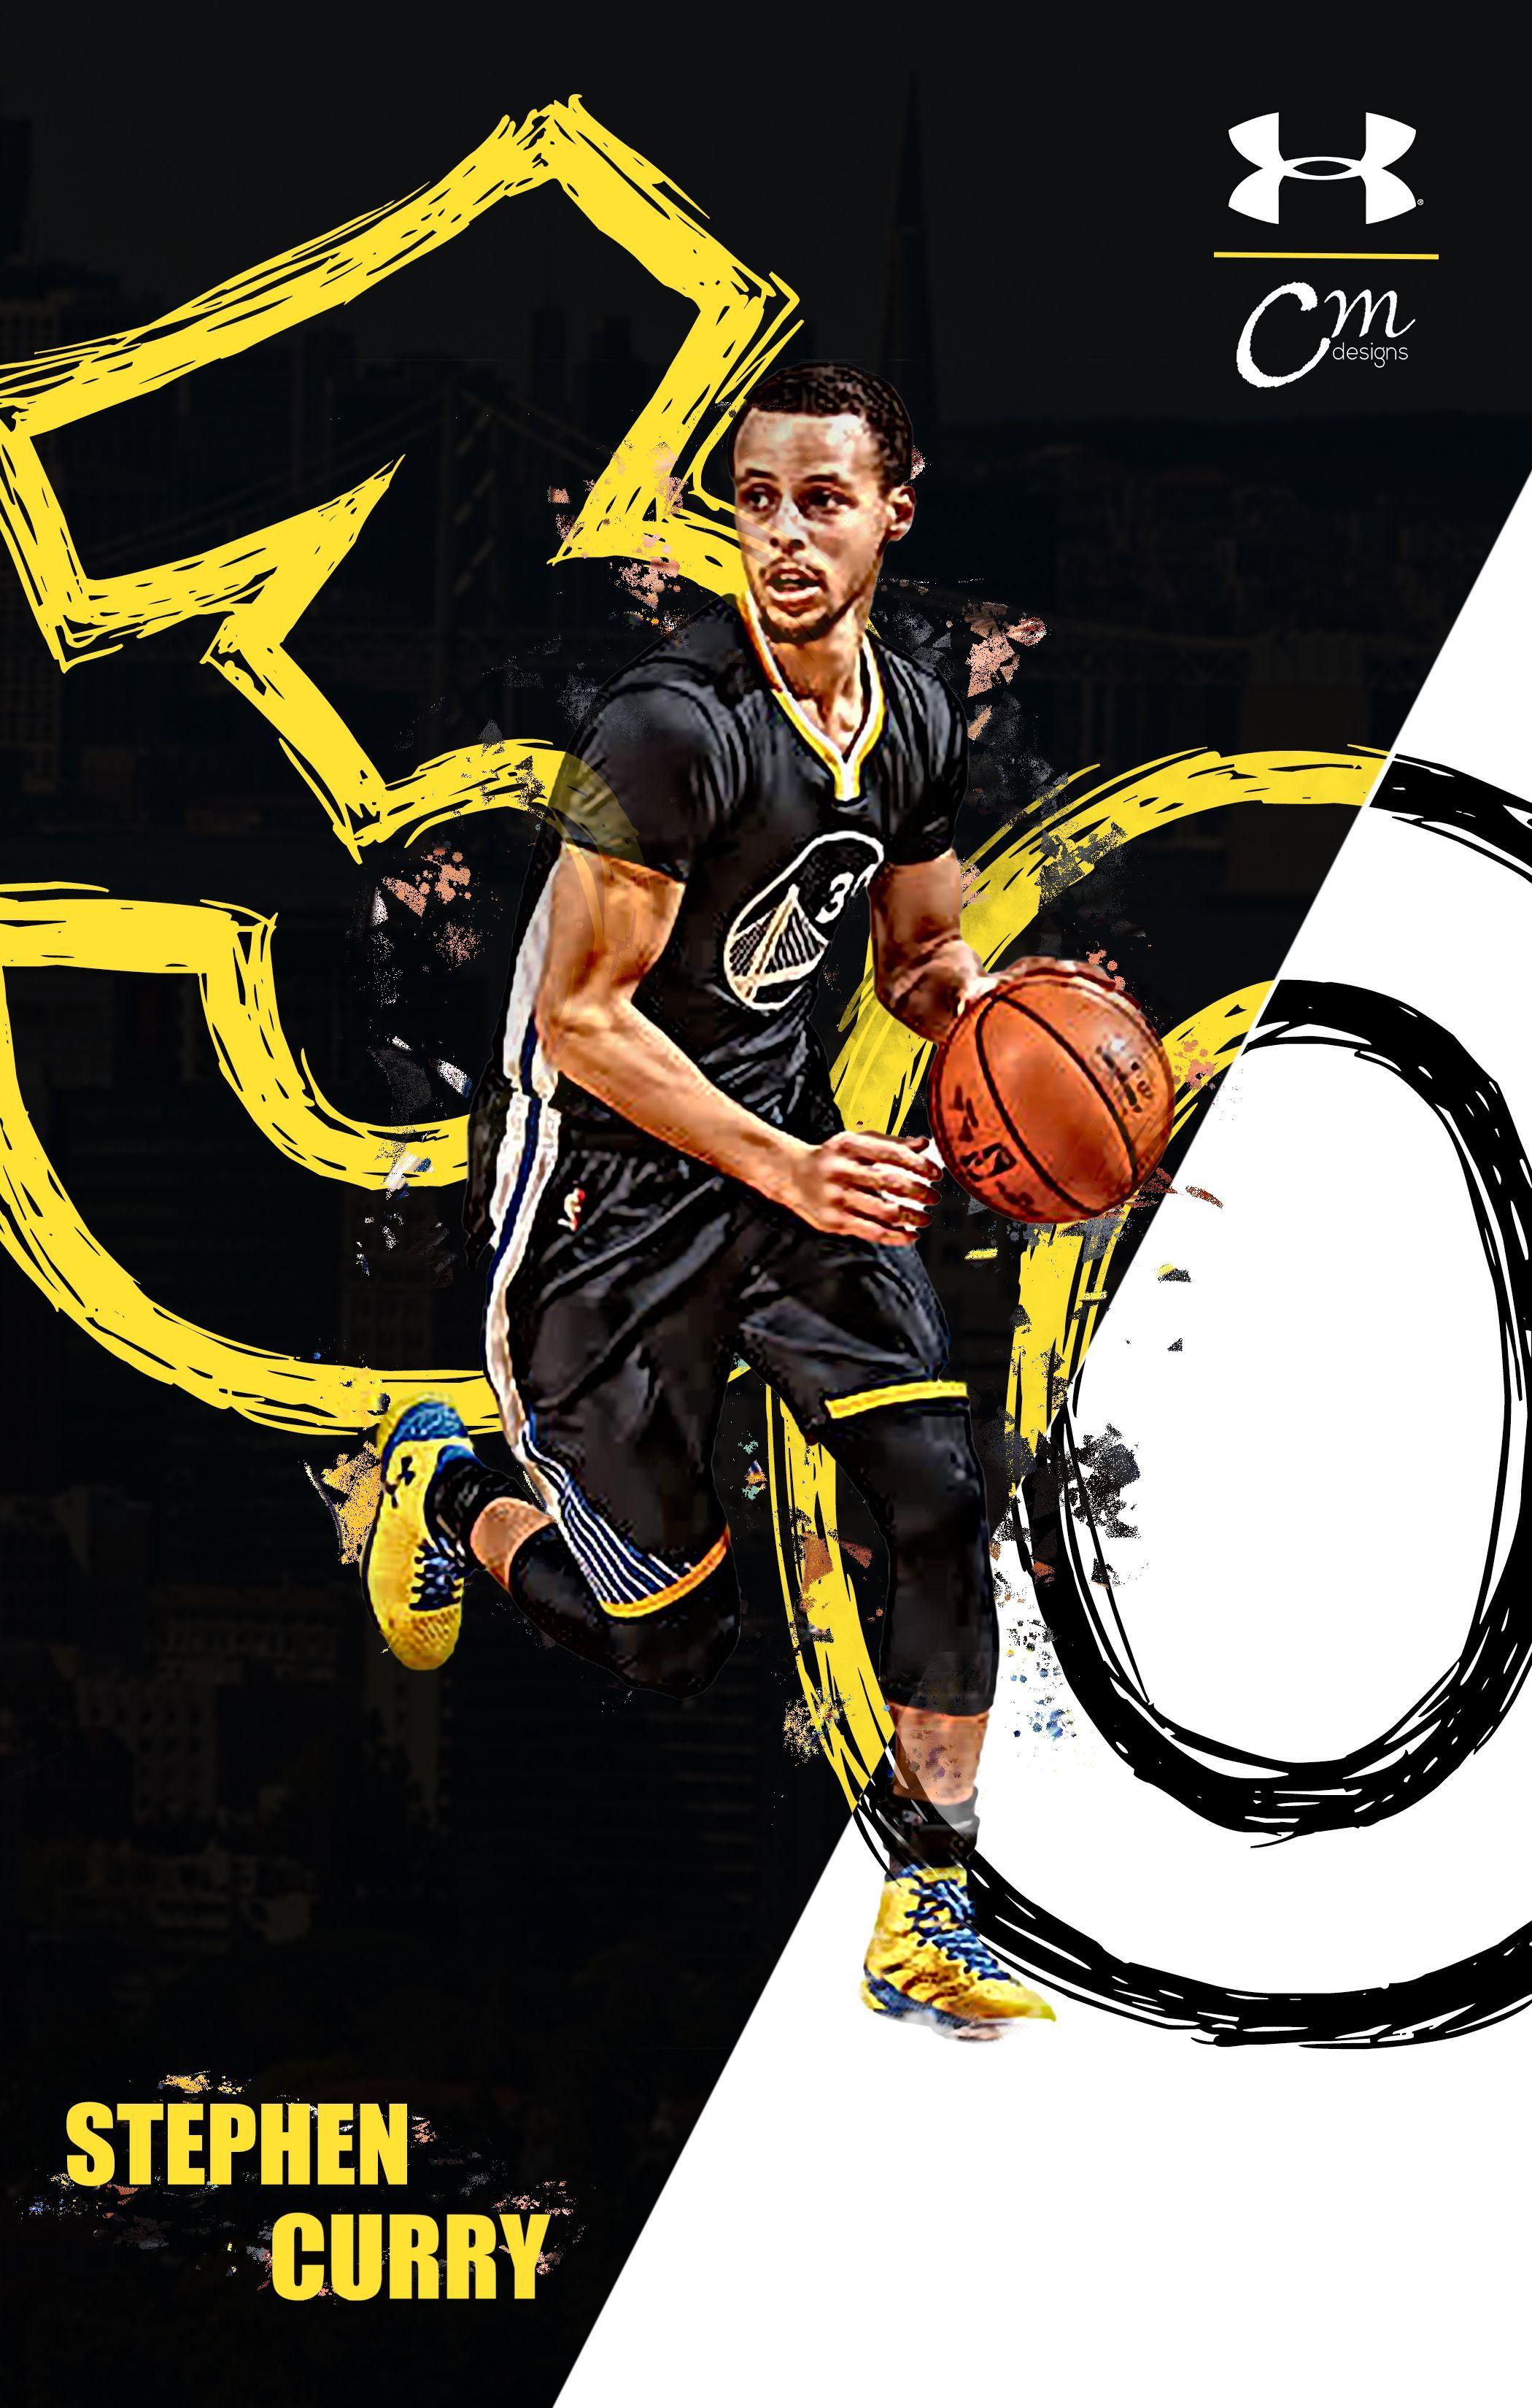 Stephen Curry Jersey Wallpapers - Wallpaper Cave